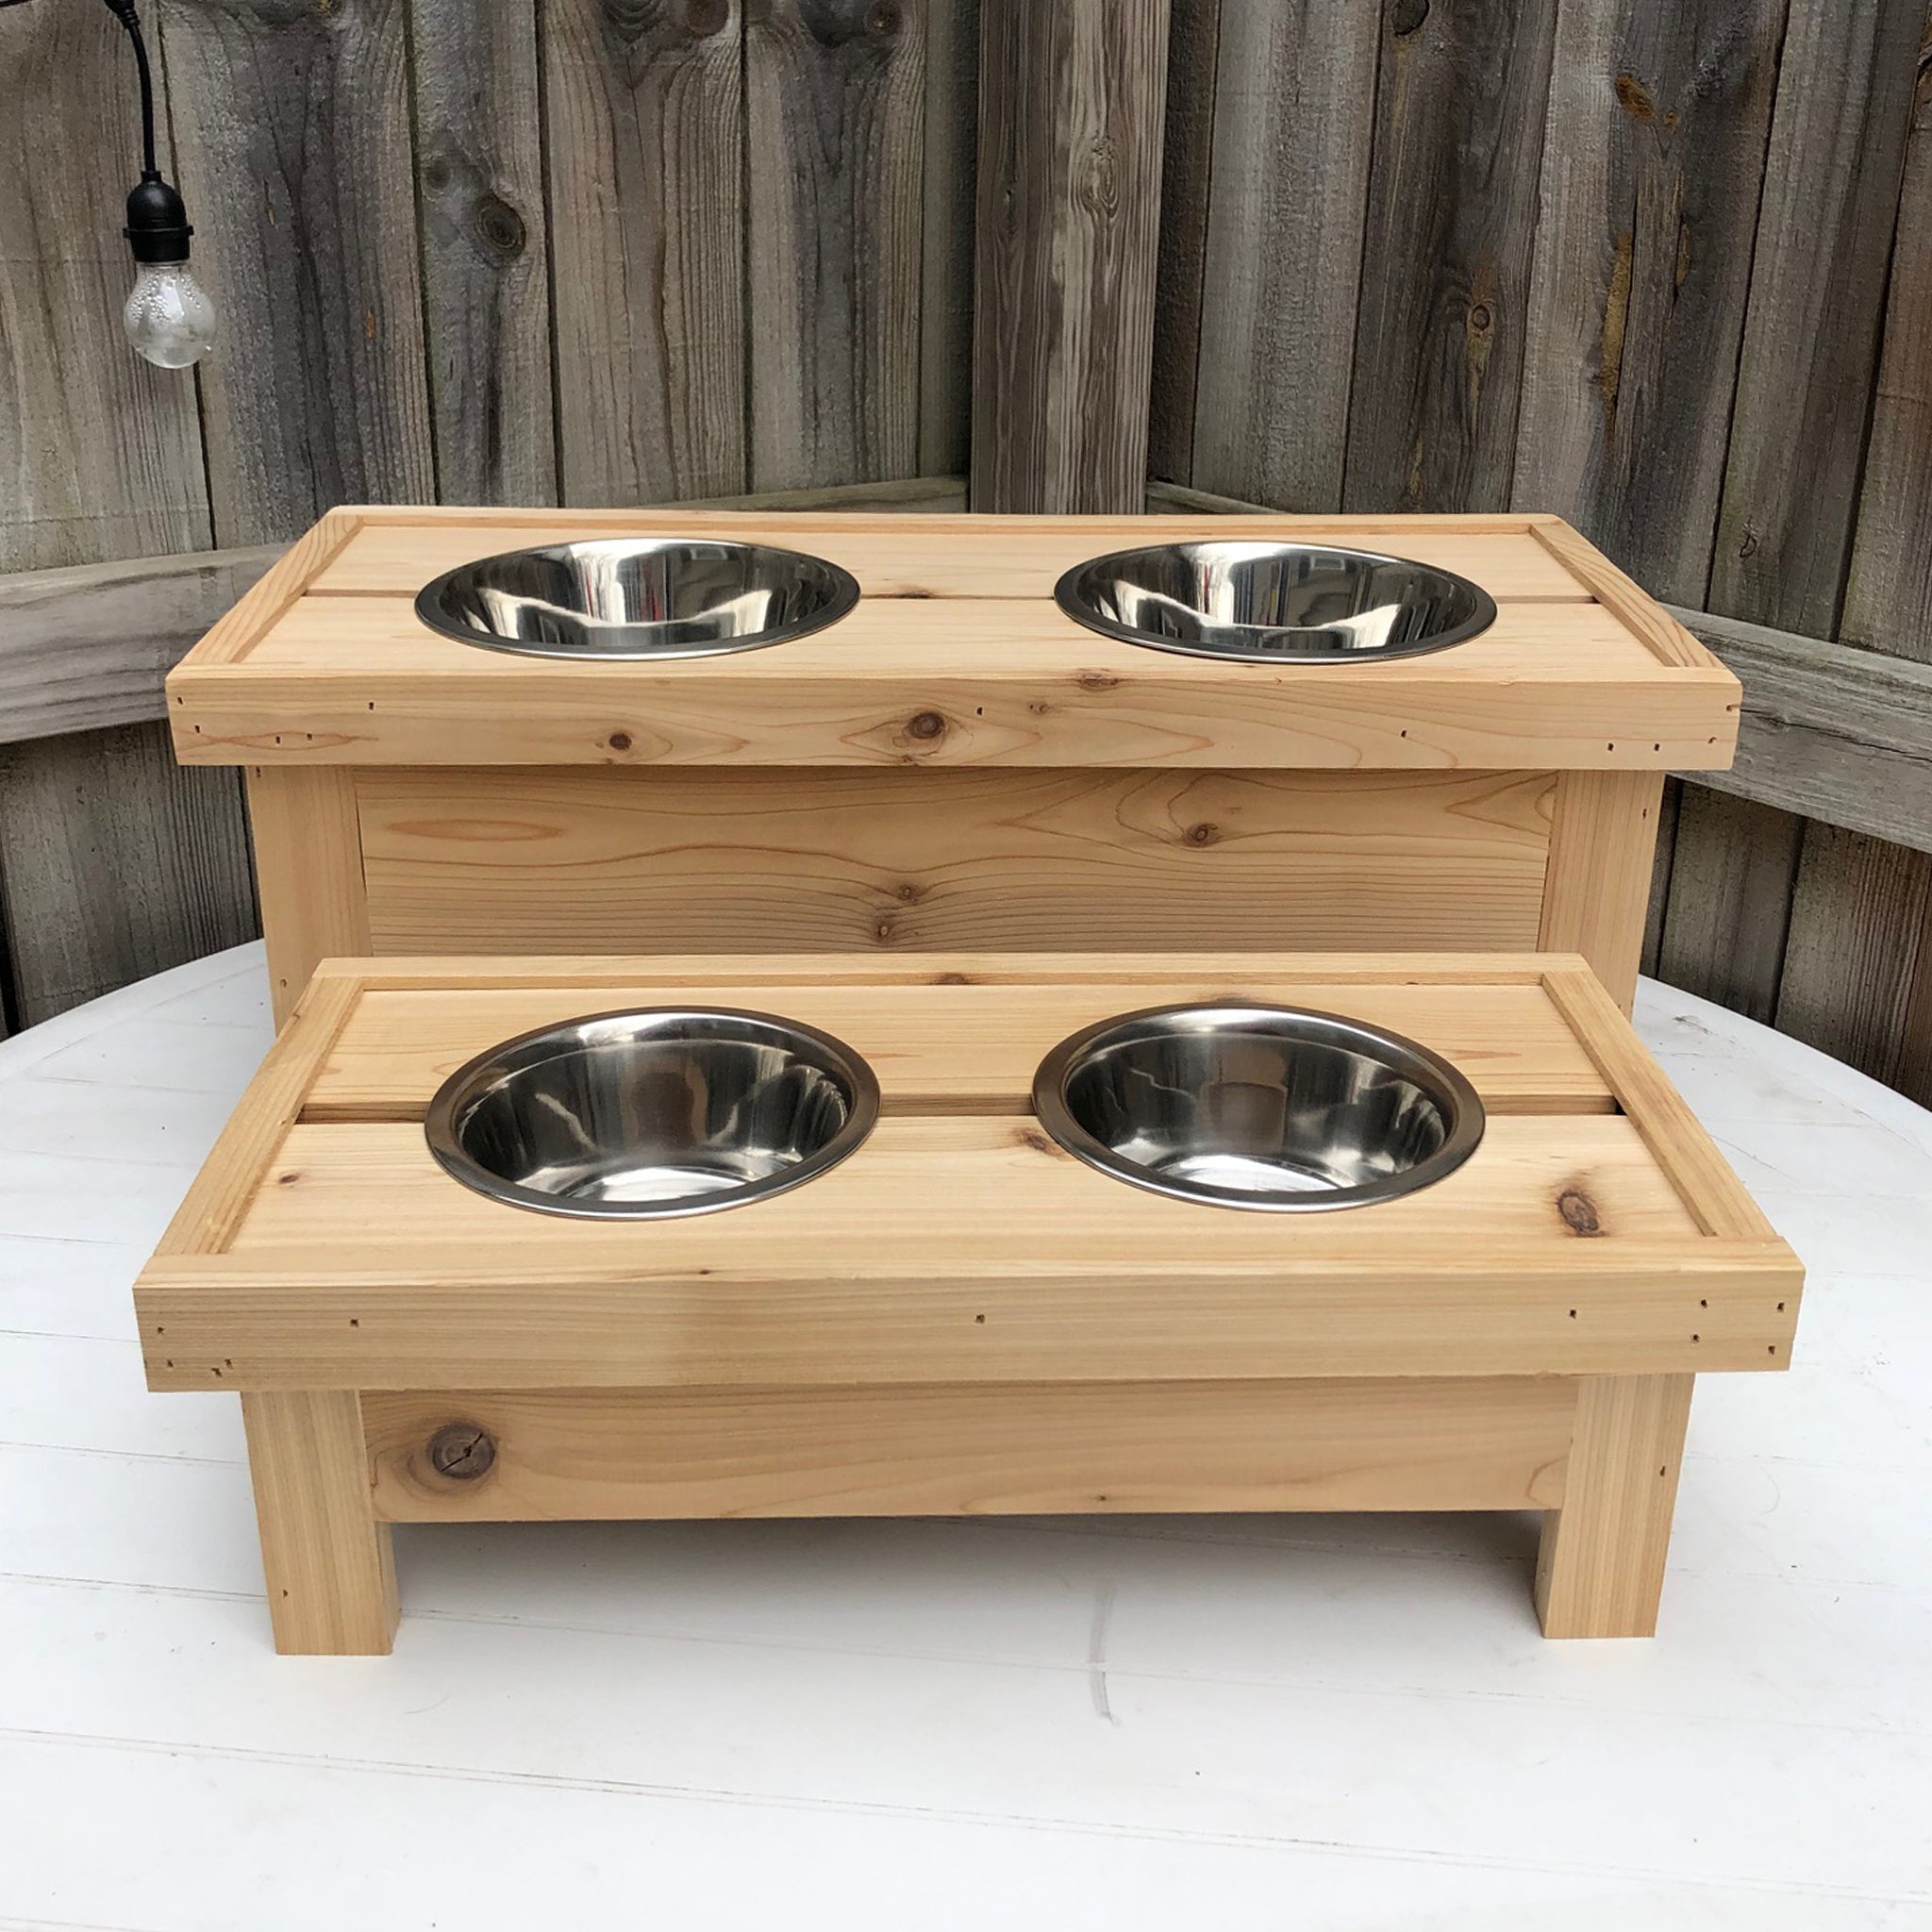 Tall Cedar Dog Bowl Stand with Stainless Steel Bowl – The Crooked